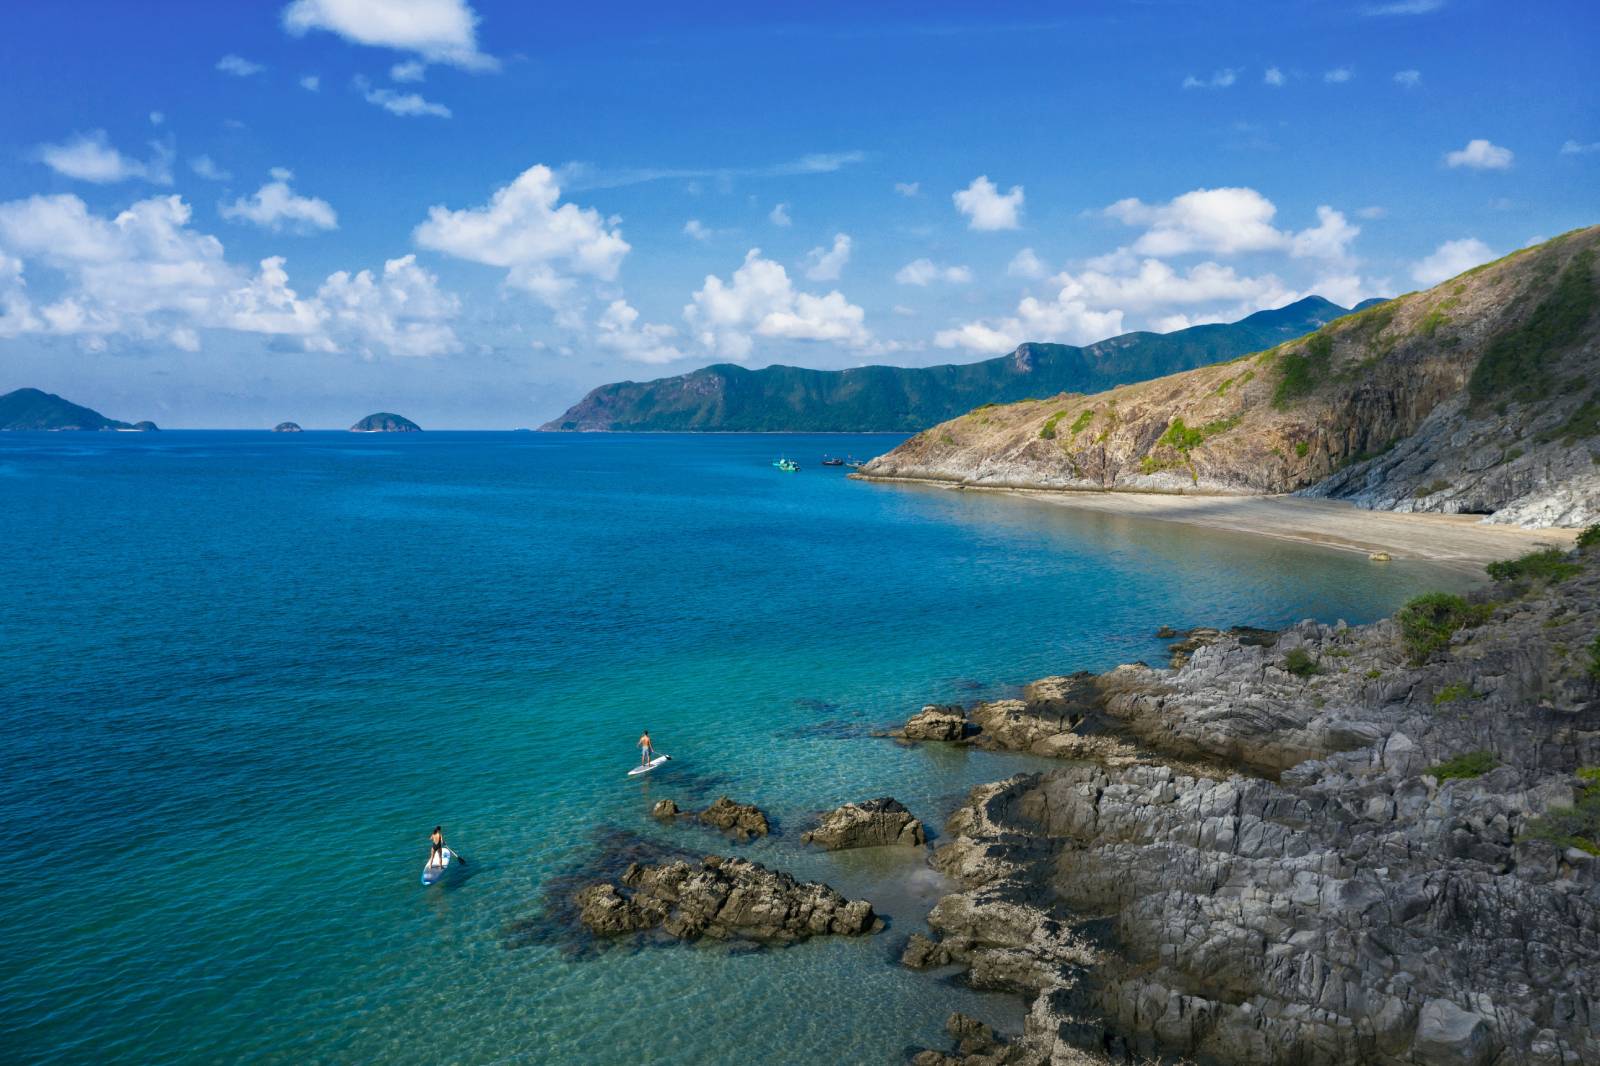 Couple paddle boarding on the blue ocean of Con Dao